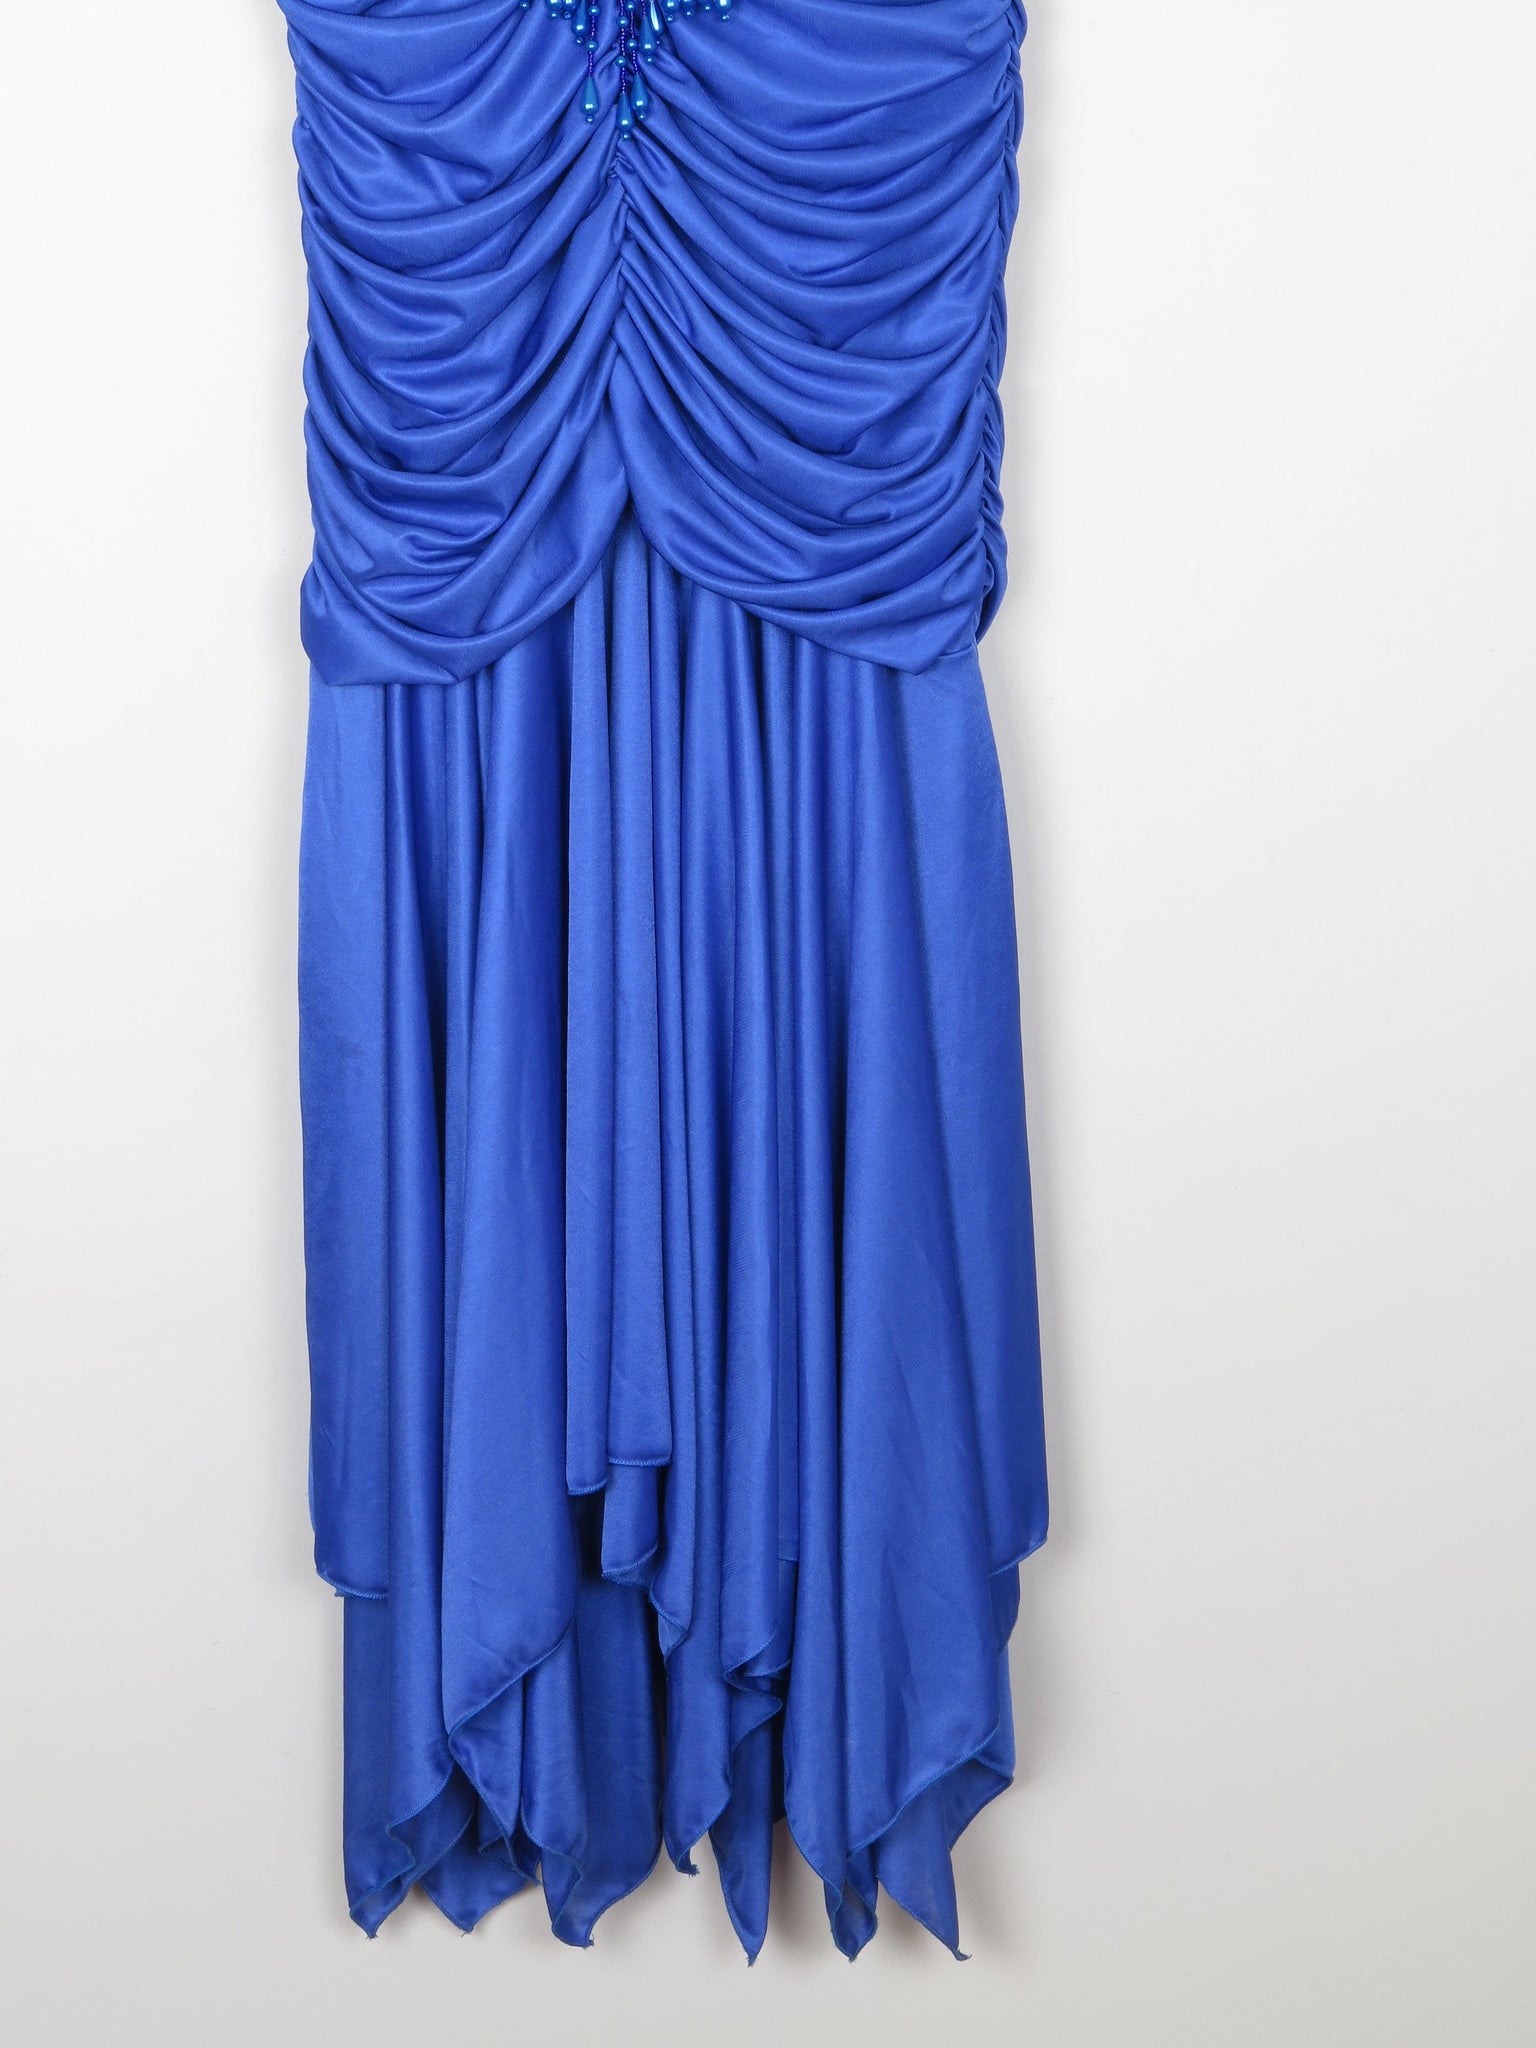 Electric Blue 1980s Draped Dress 10/12 - The Harlequin